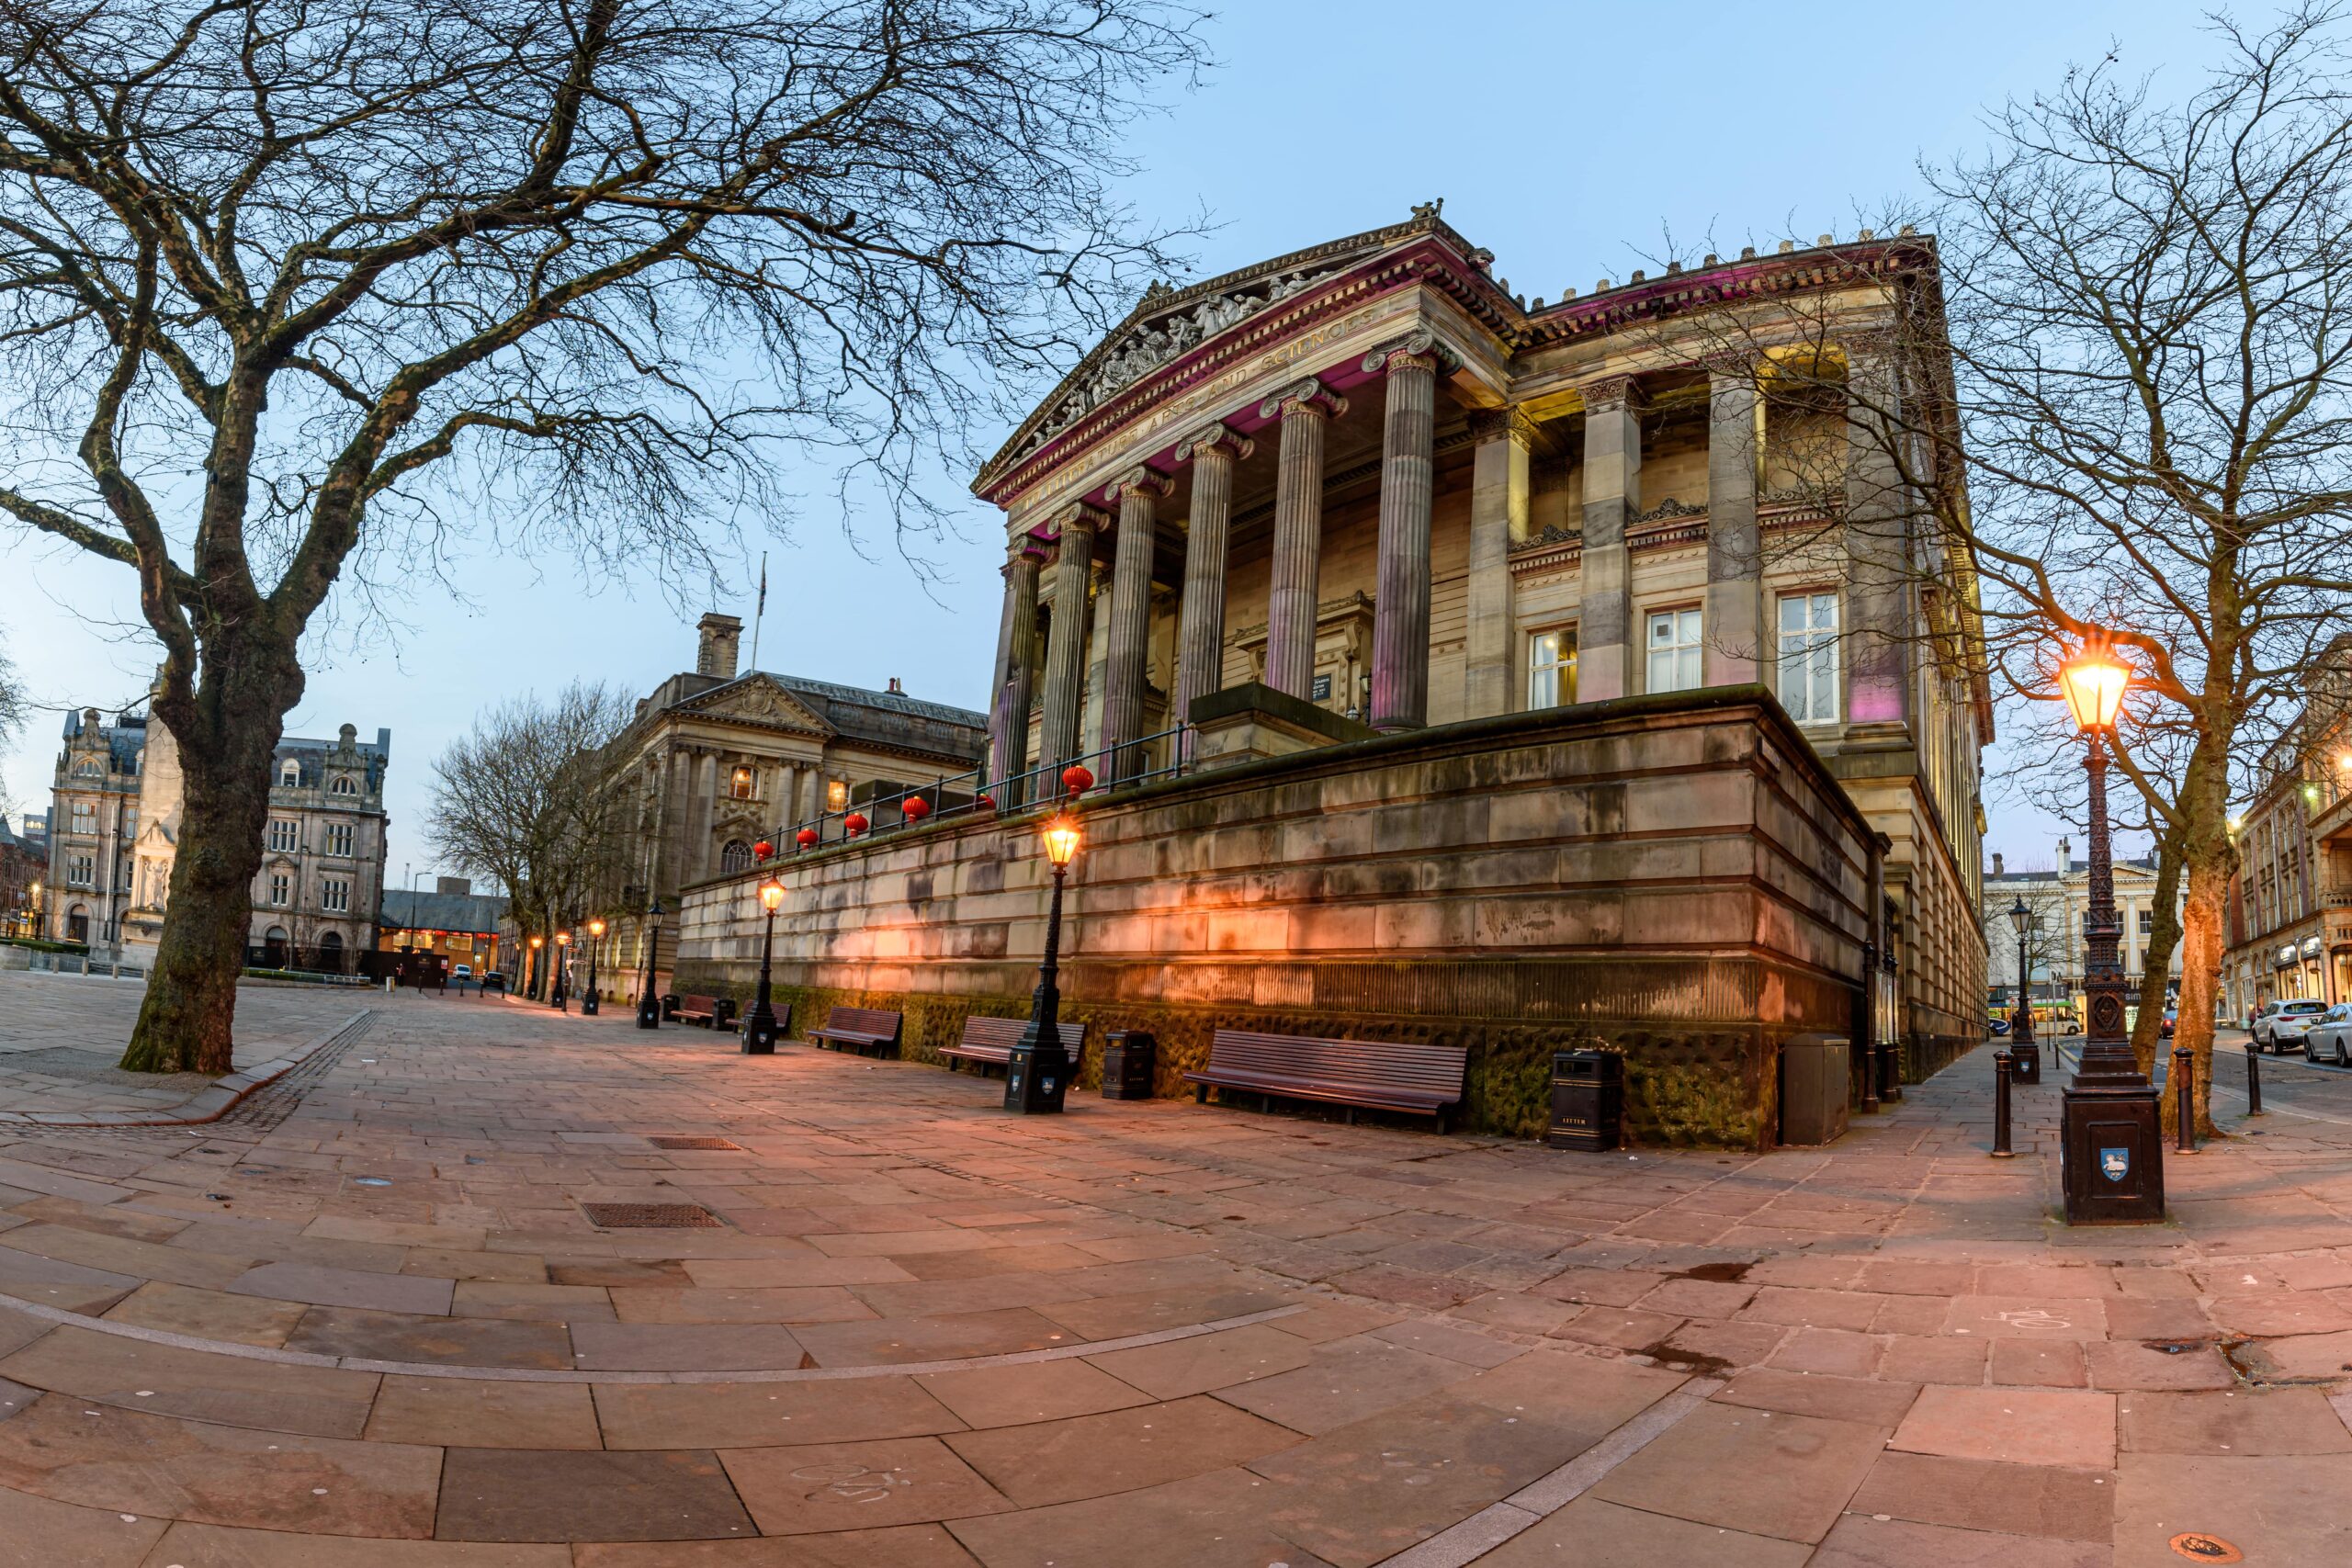 Harris Museum is located in the square town of preston,city of Lancashire